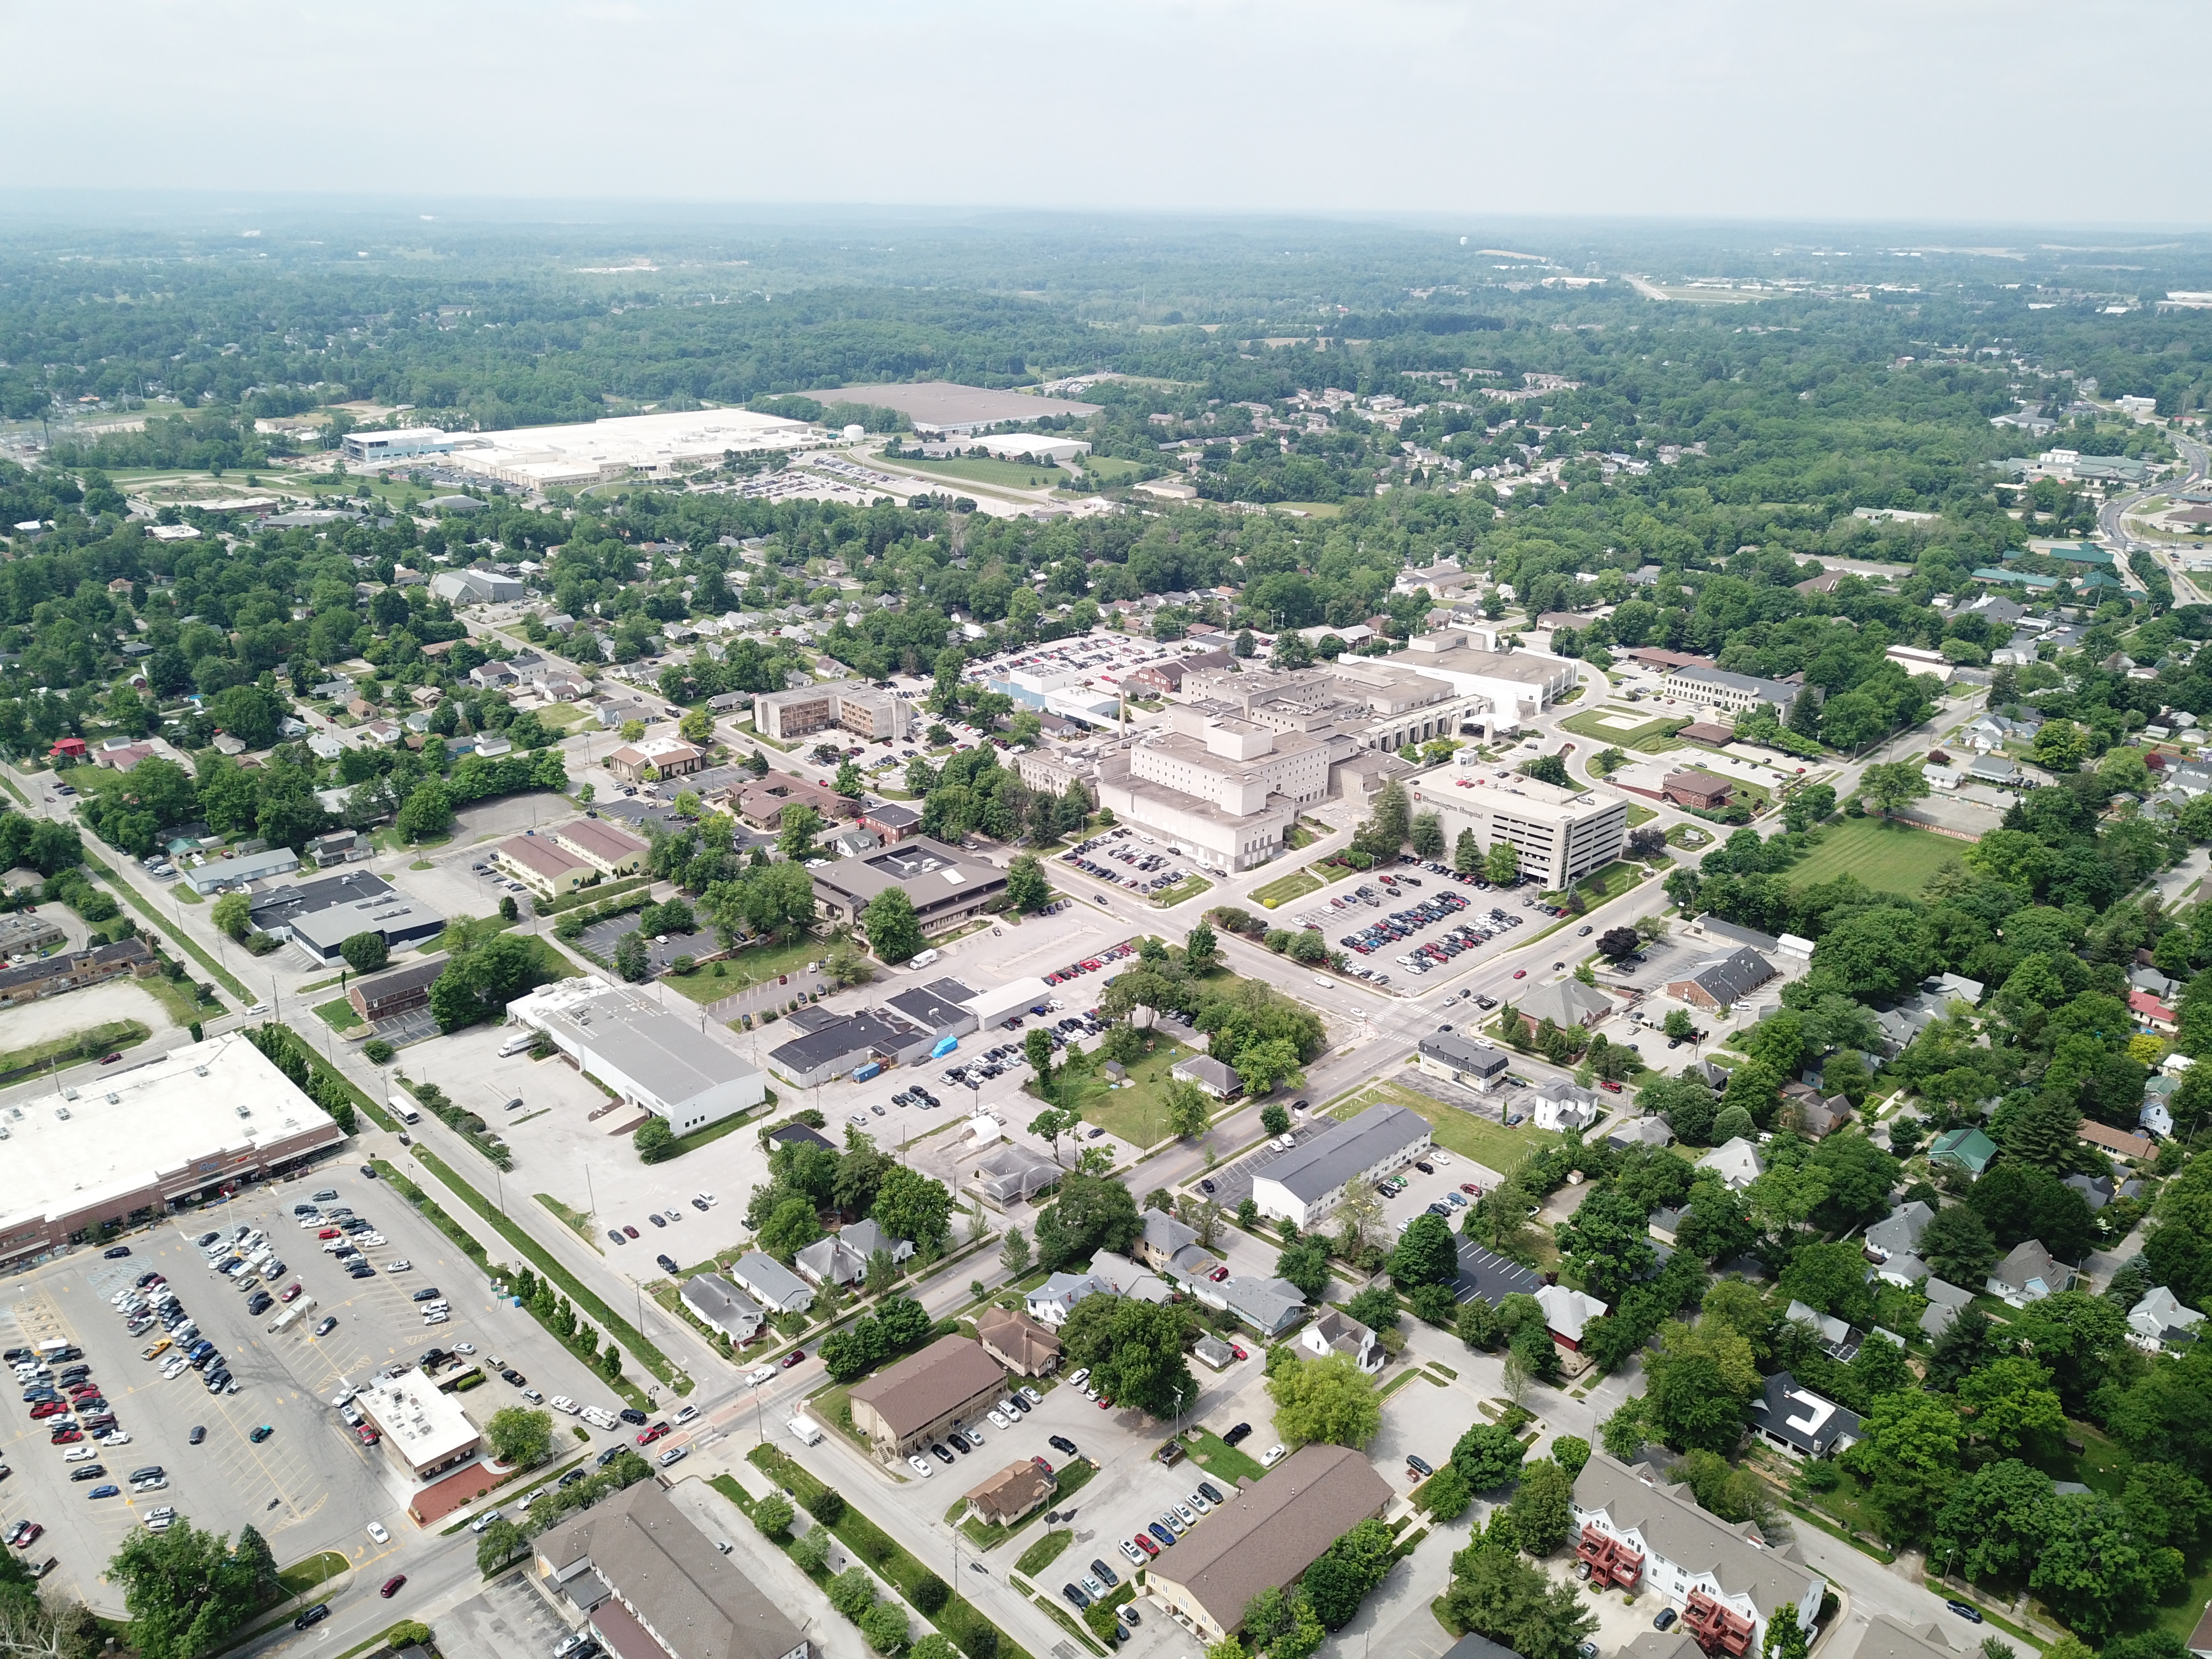 Hospital Site from Drone